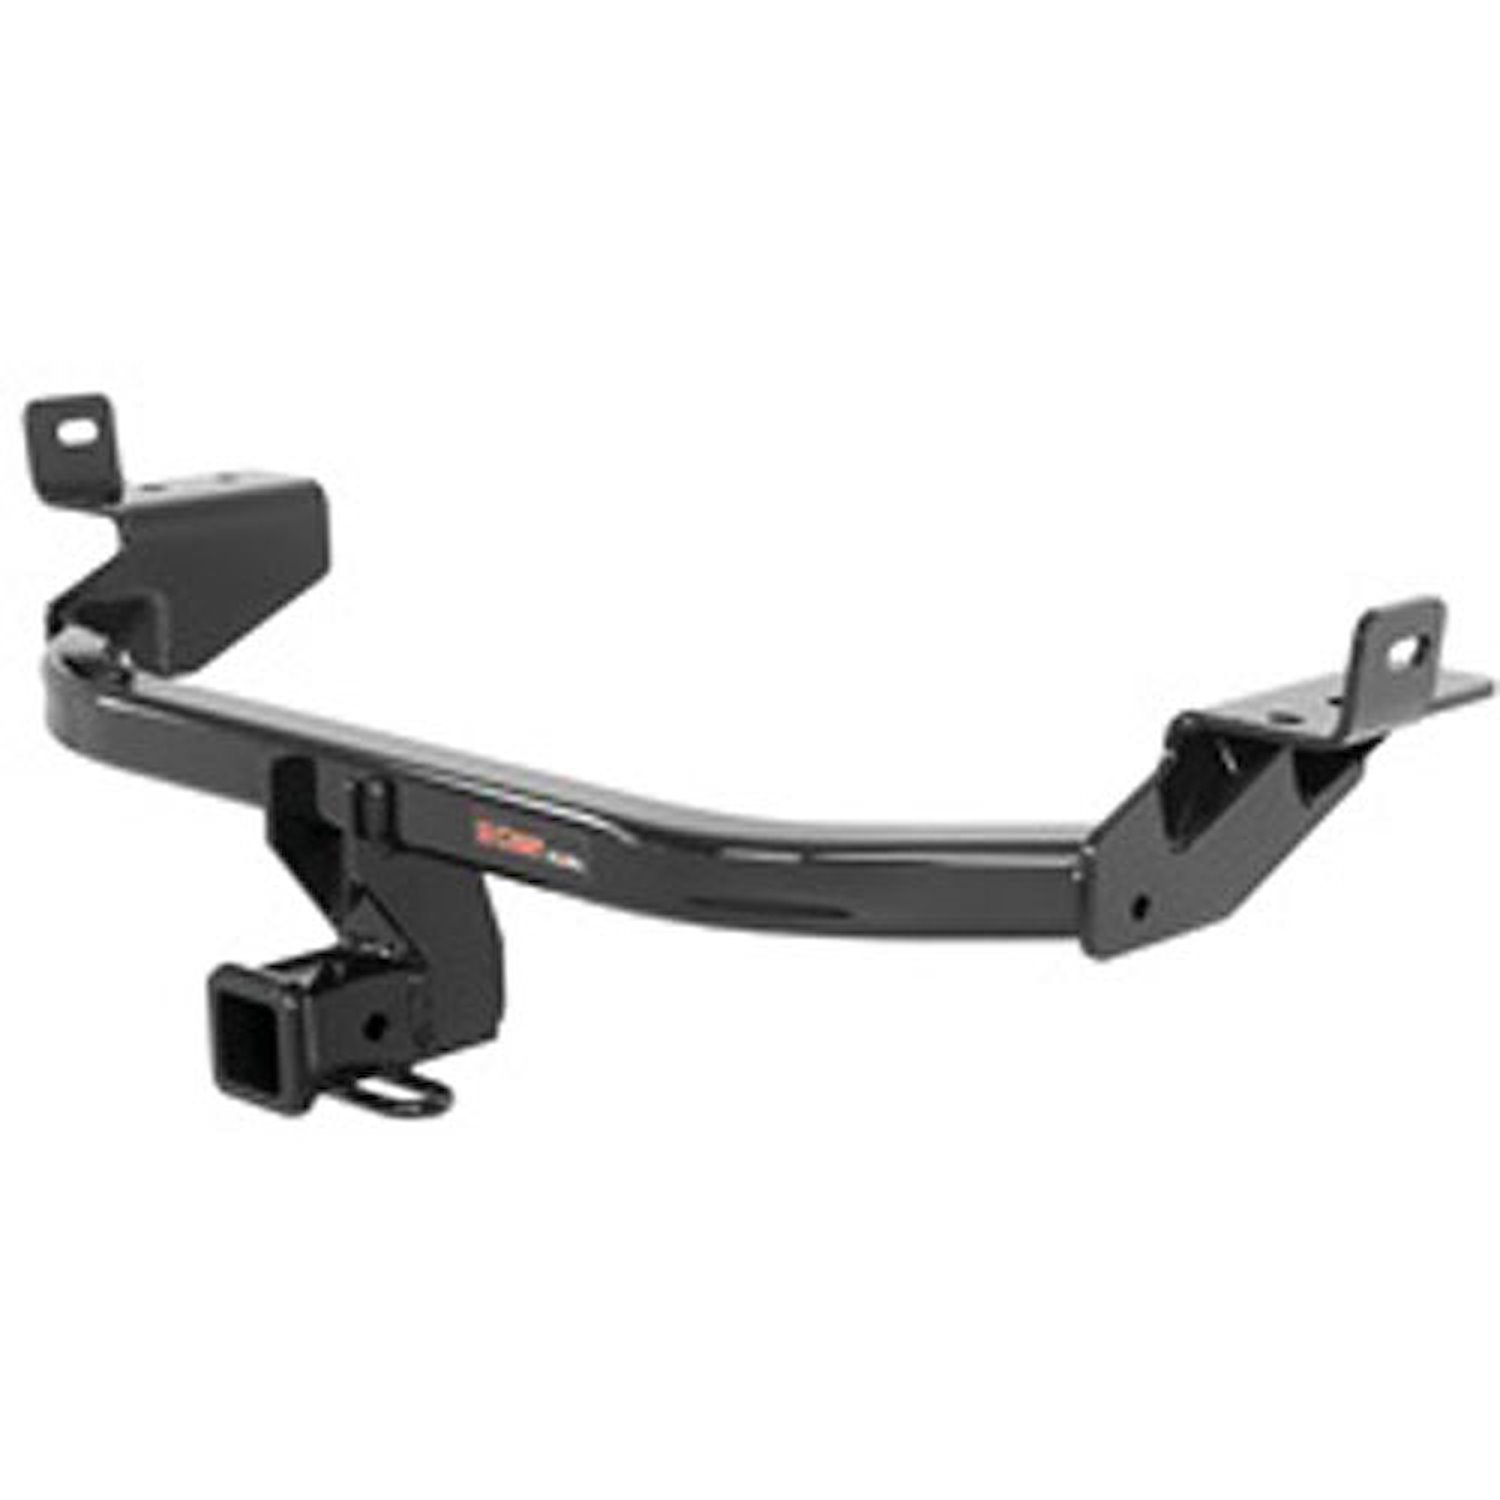 Class 3 Square Tube Receiver Hitch 2014-2016 Jeep Cherokee